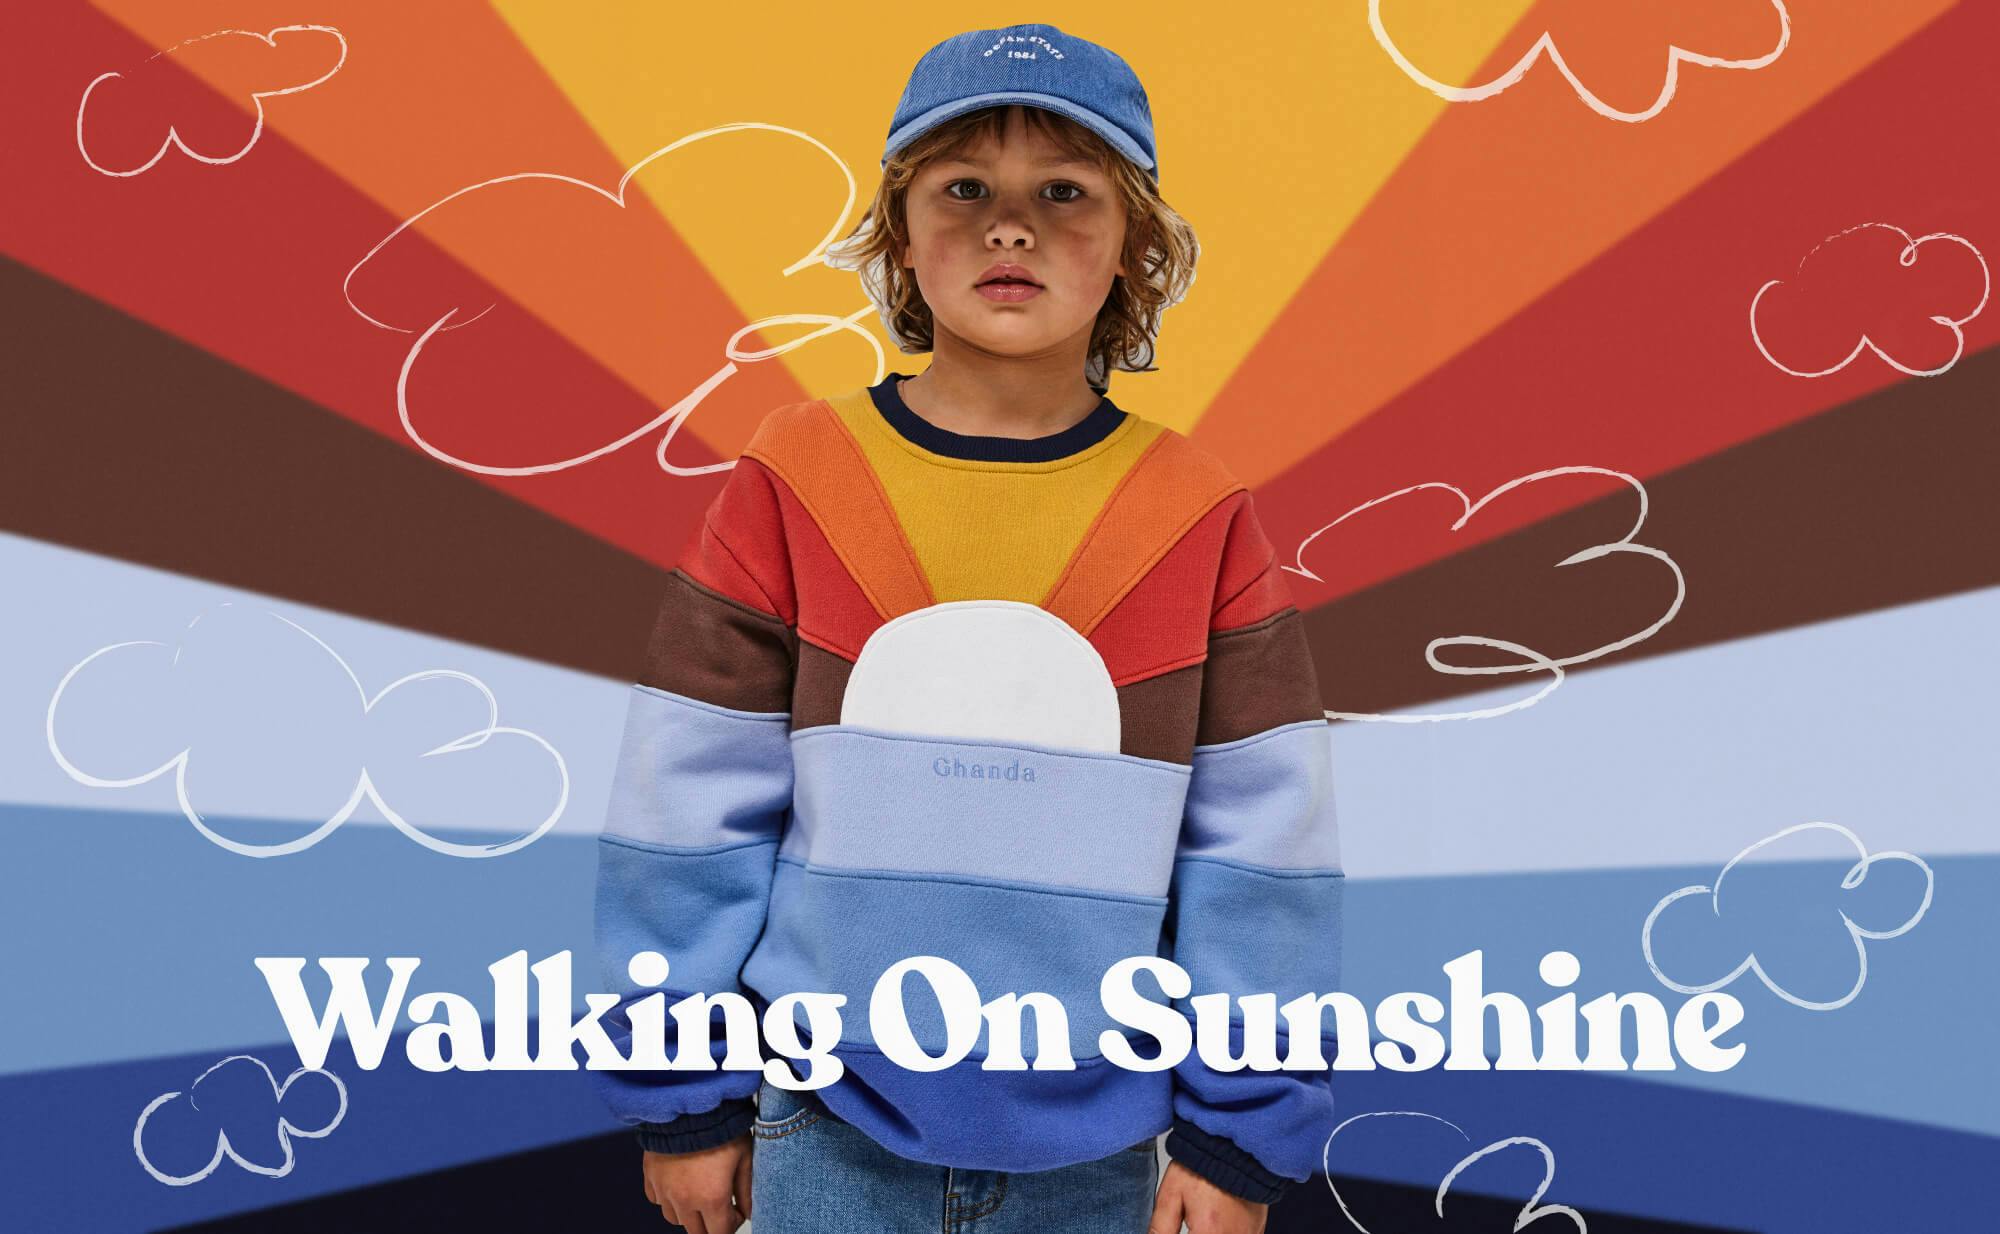 Colourful kids banner. Image of young boy wearing the sunshine crew, and the colours of the jumper extend onto the background. Drawn clouds surround him and the text "Walking on Sunshine" is white and centre in the lower bottom. 